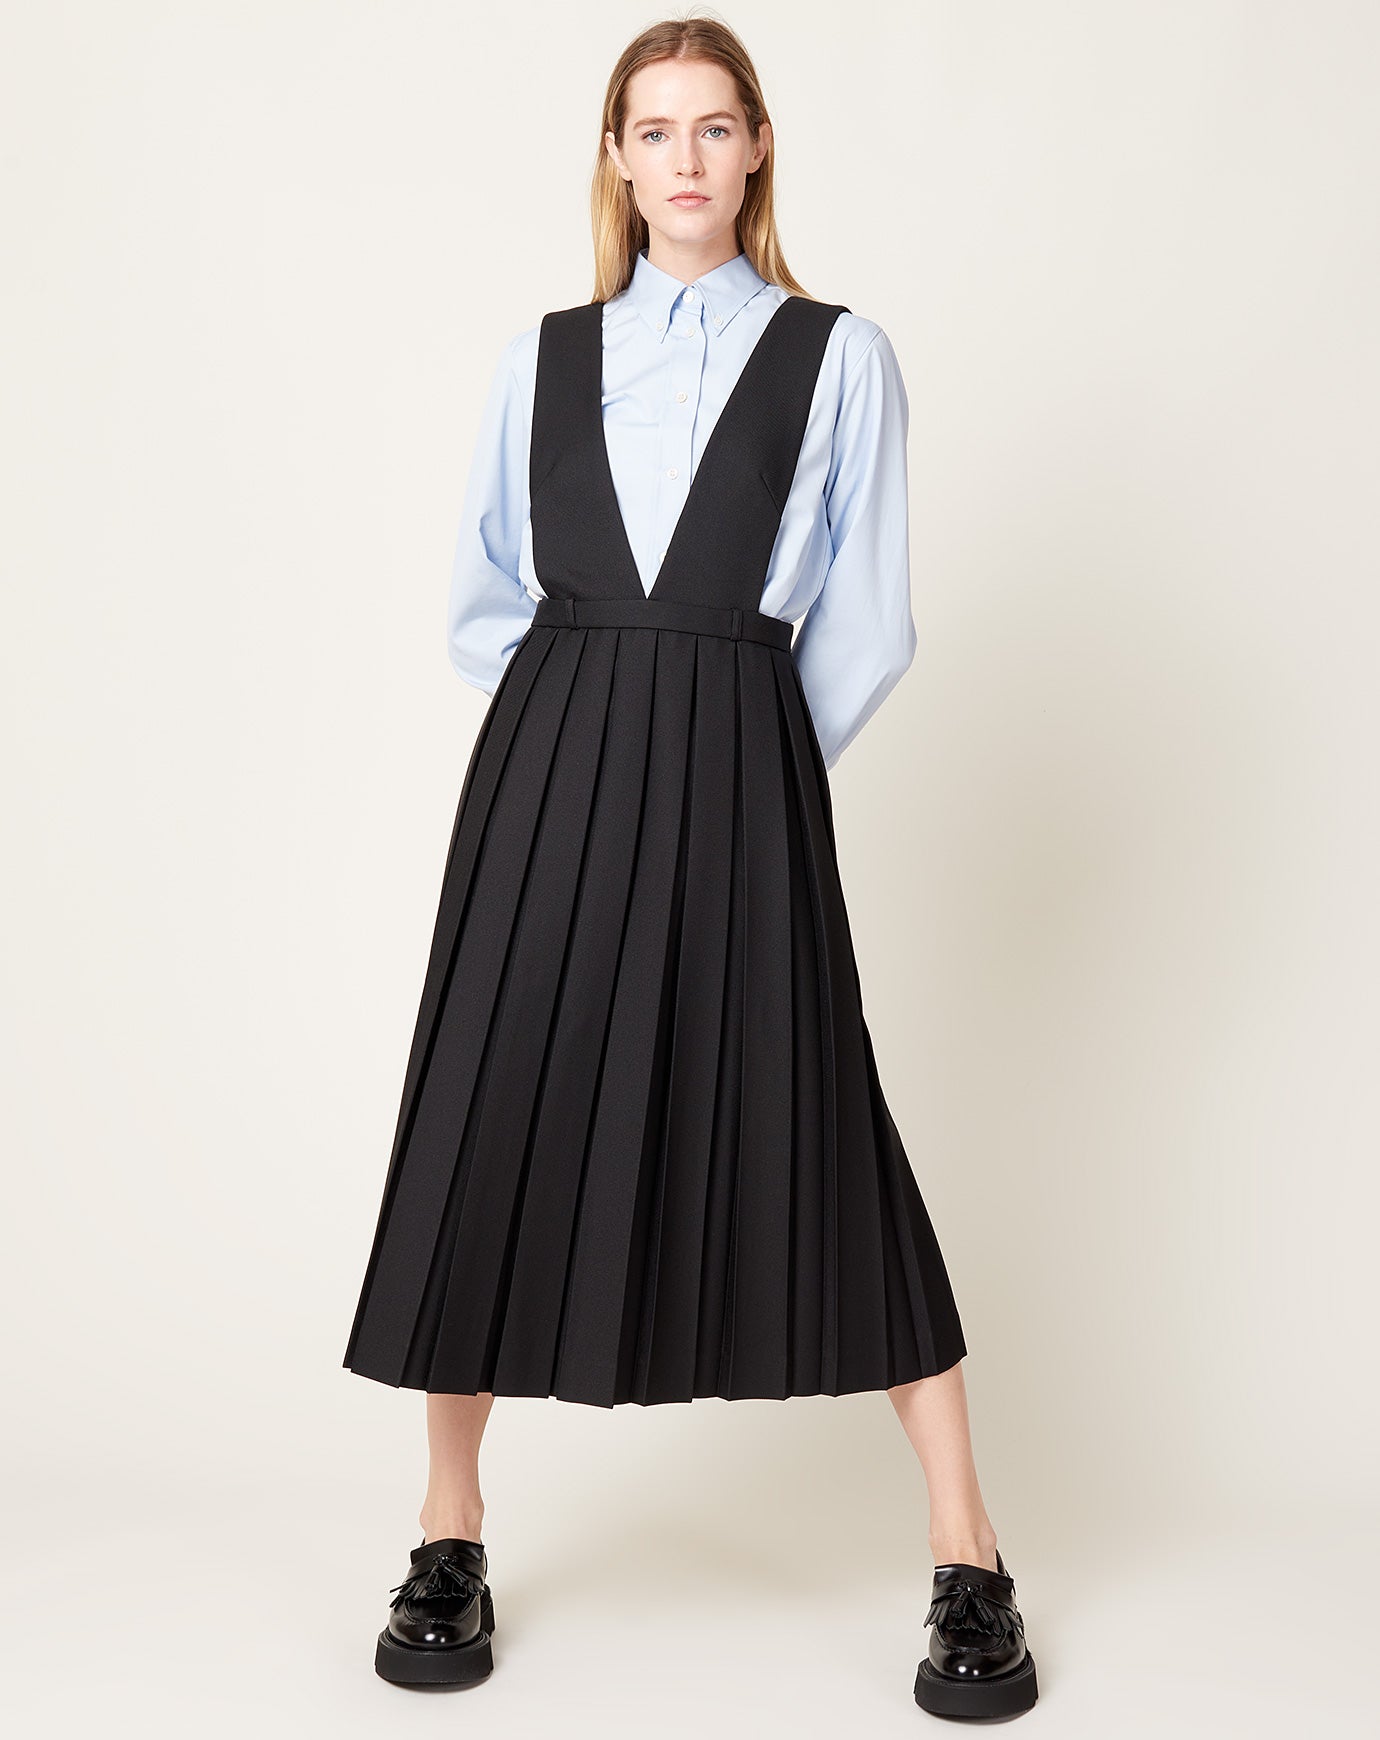 Sandy Liang Odeon Pinafore in Black